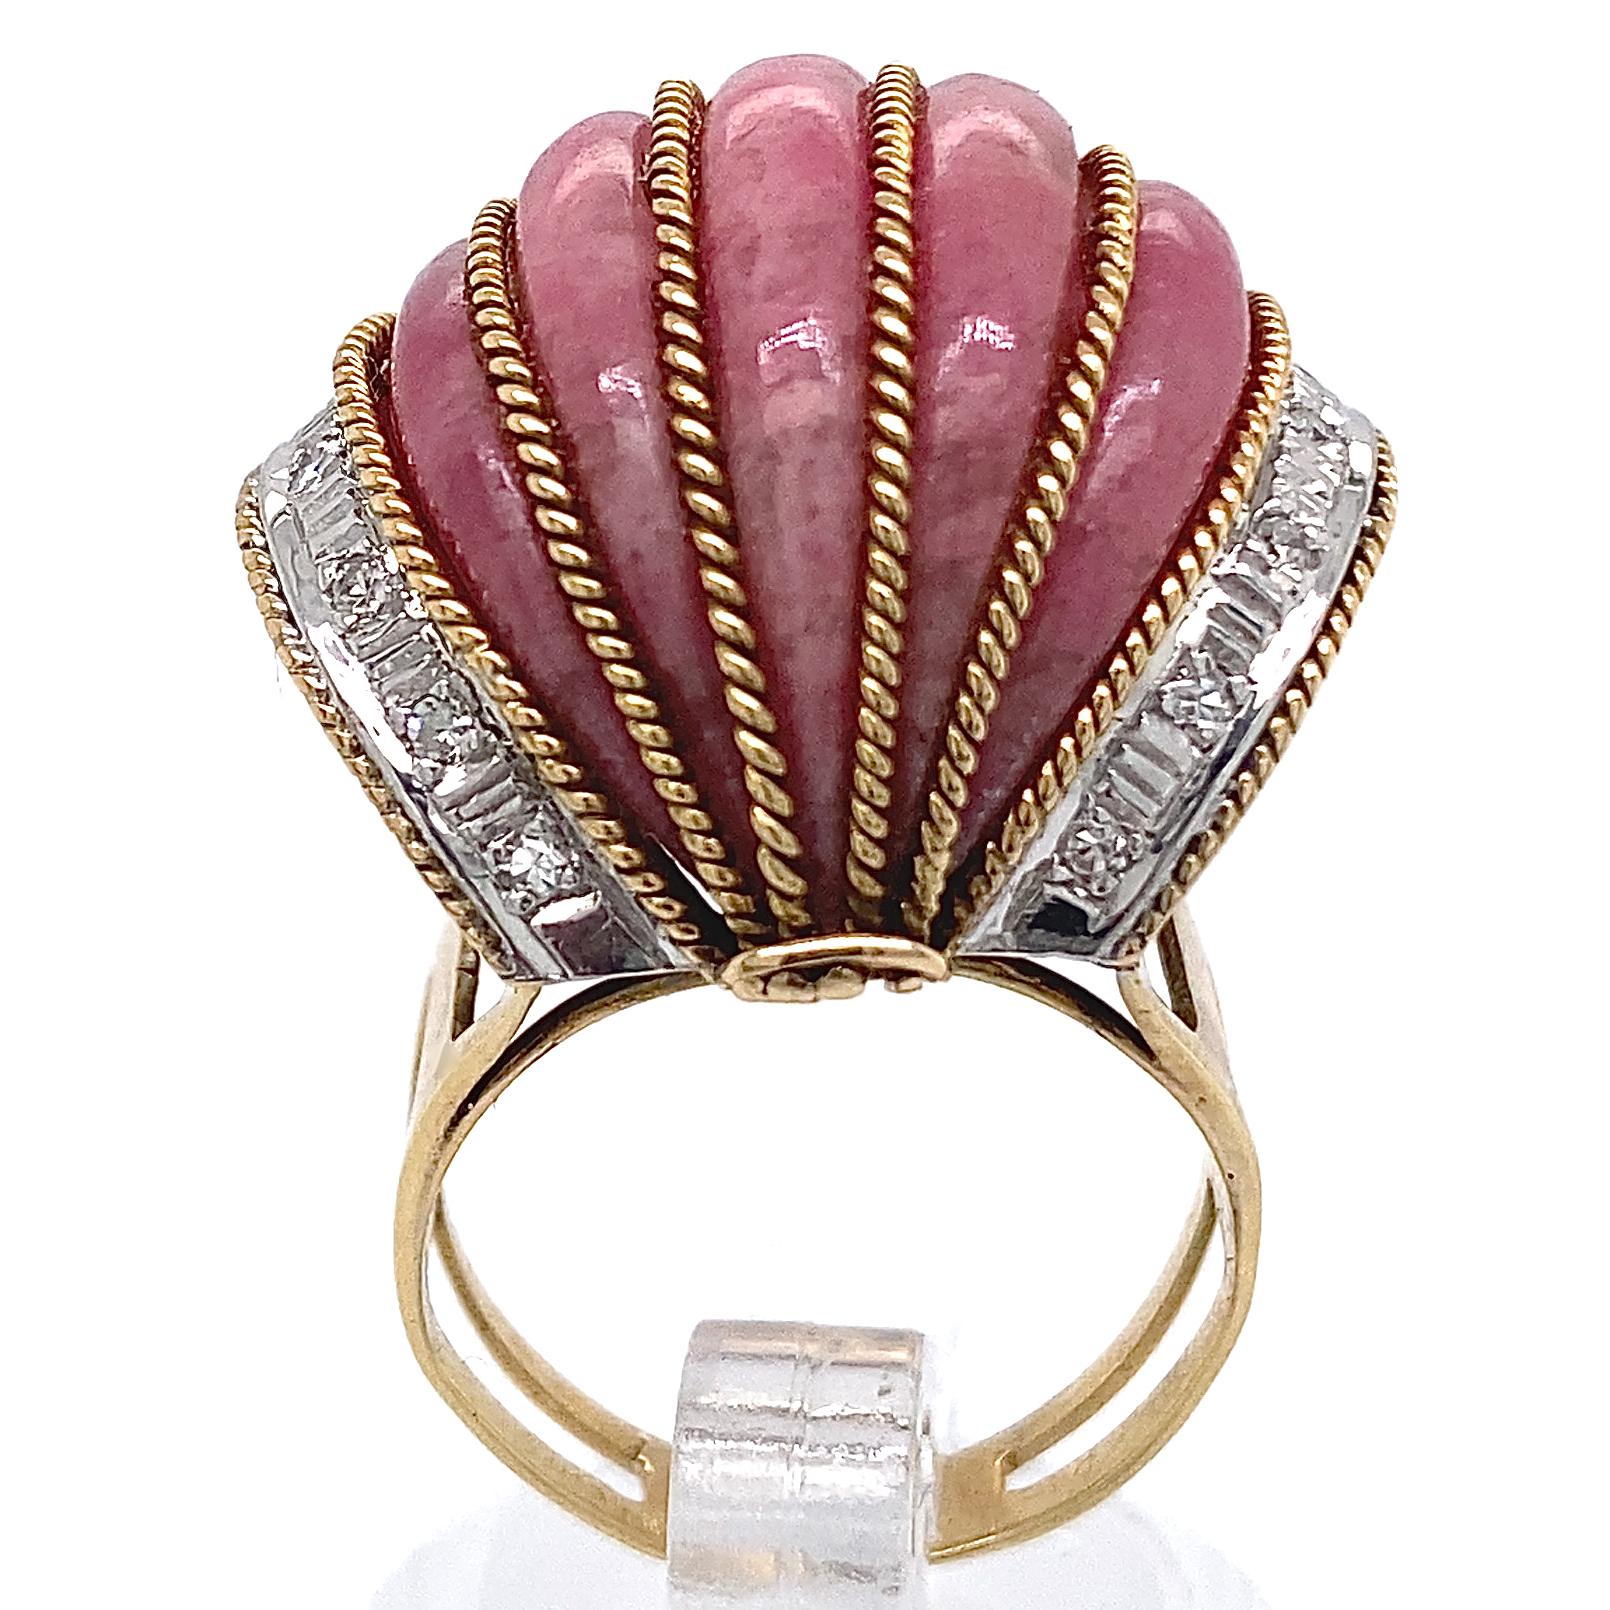 Rhodochrosite Bombe Cocktail Ring in Yellow Gold with Diamonds, Circa 1950 For Sale 4